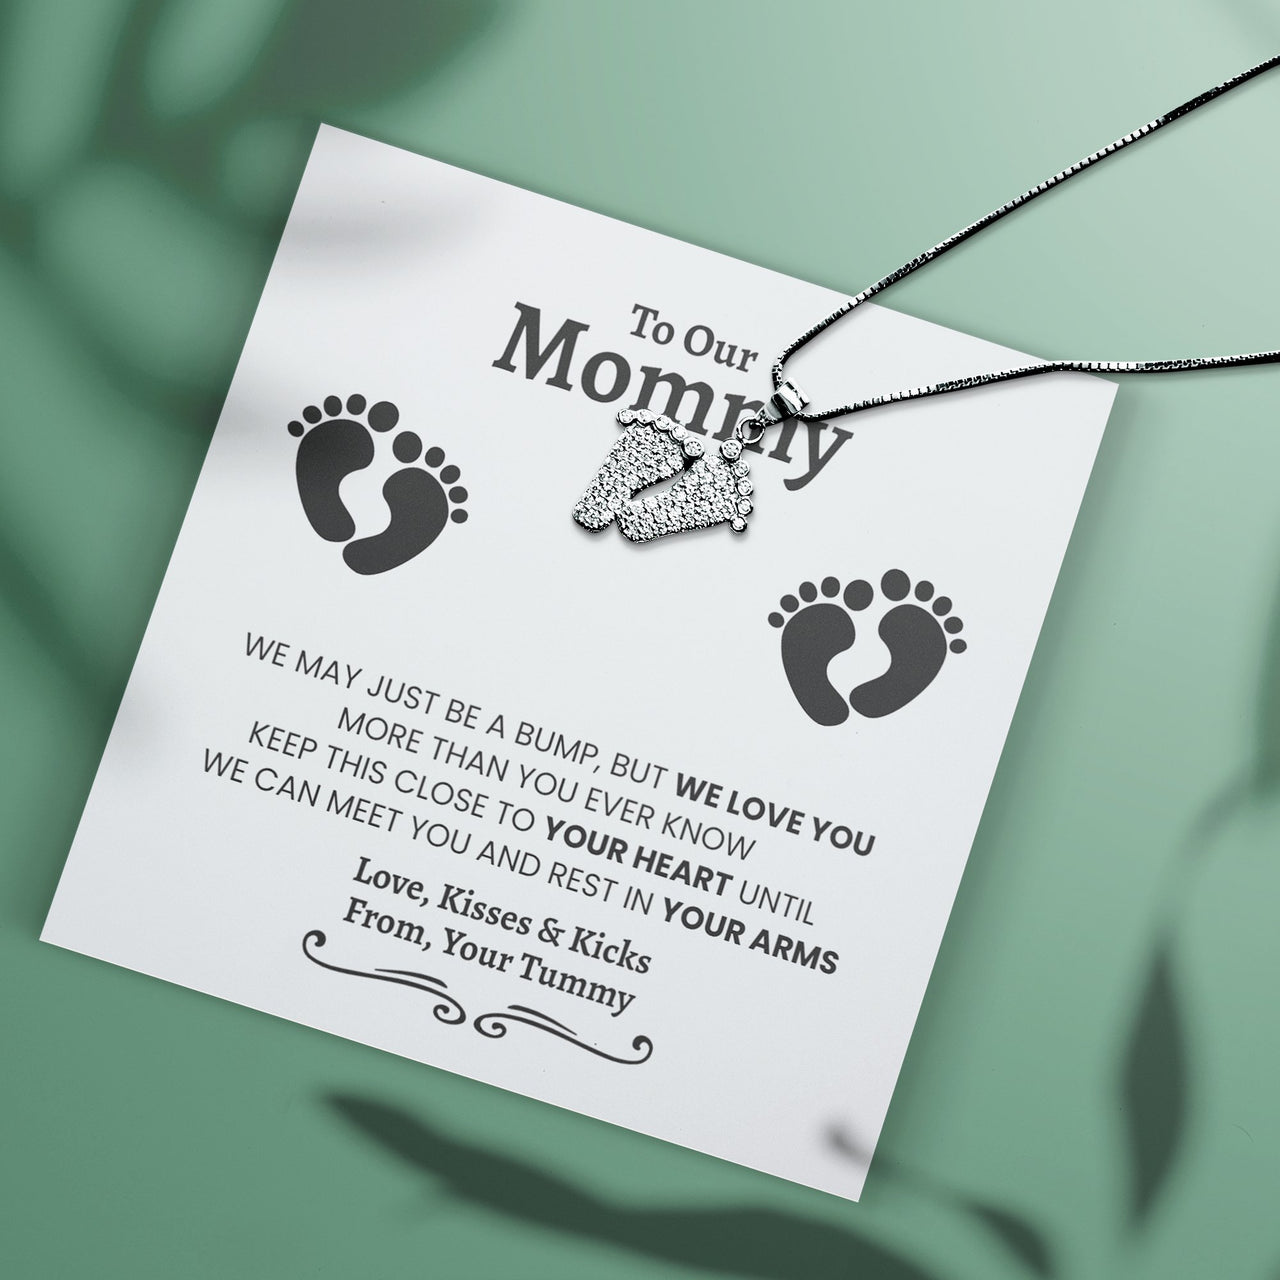 New Mom Expecting Twins Baby Feet Necklace - Love You This Much